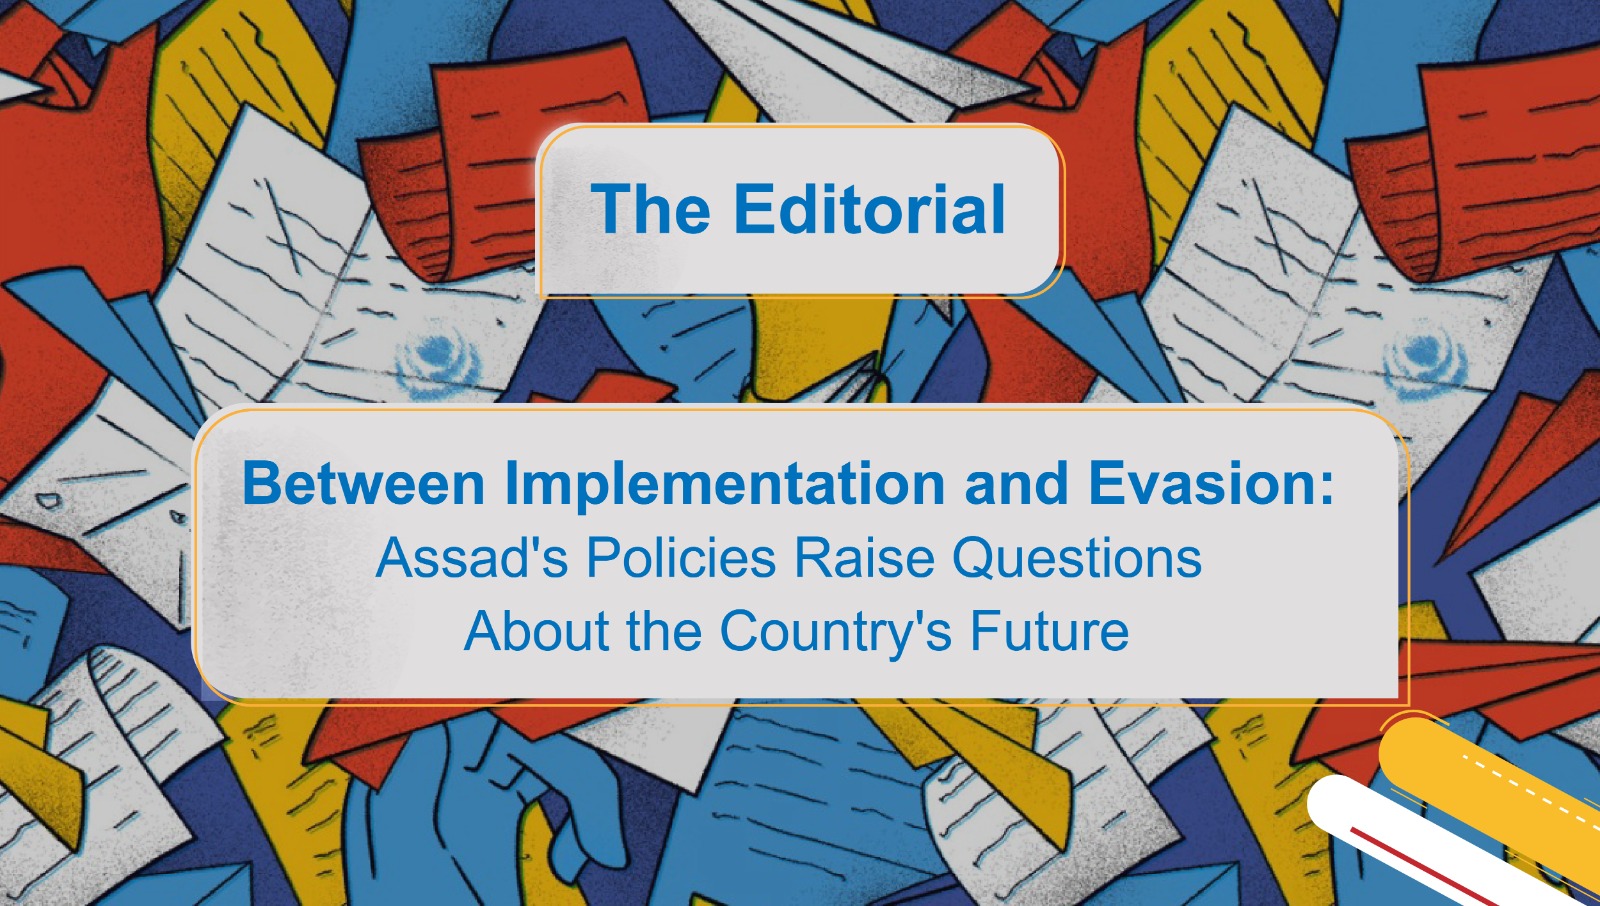 Between Implementation and Evasion: Assad’s Policies Raise Questions About the Country’s Future